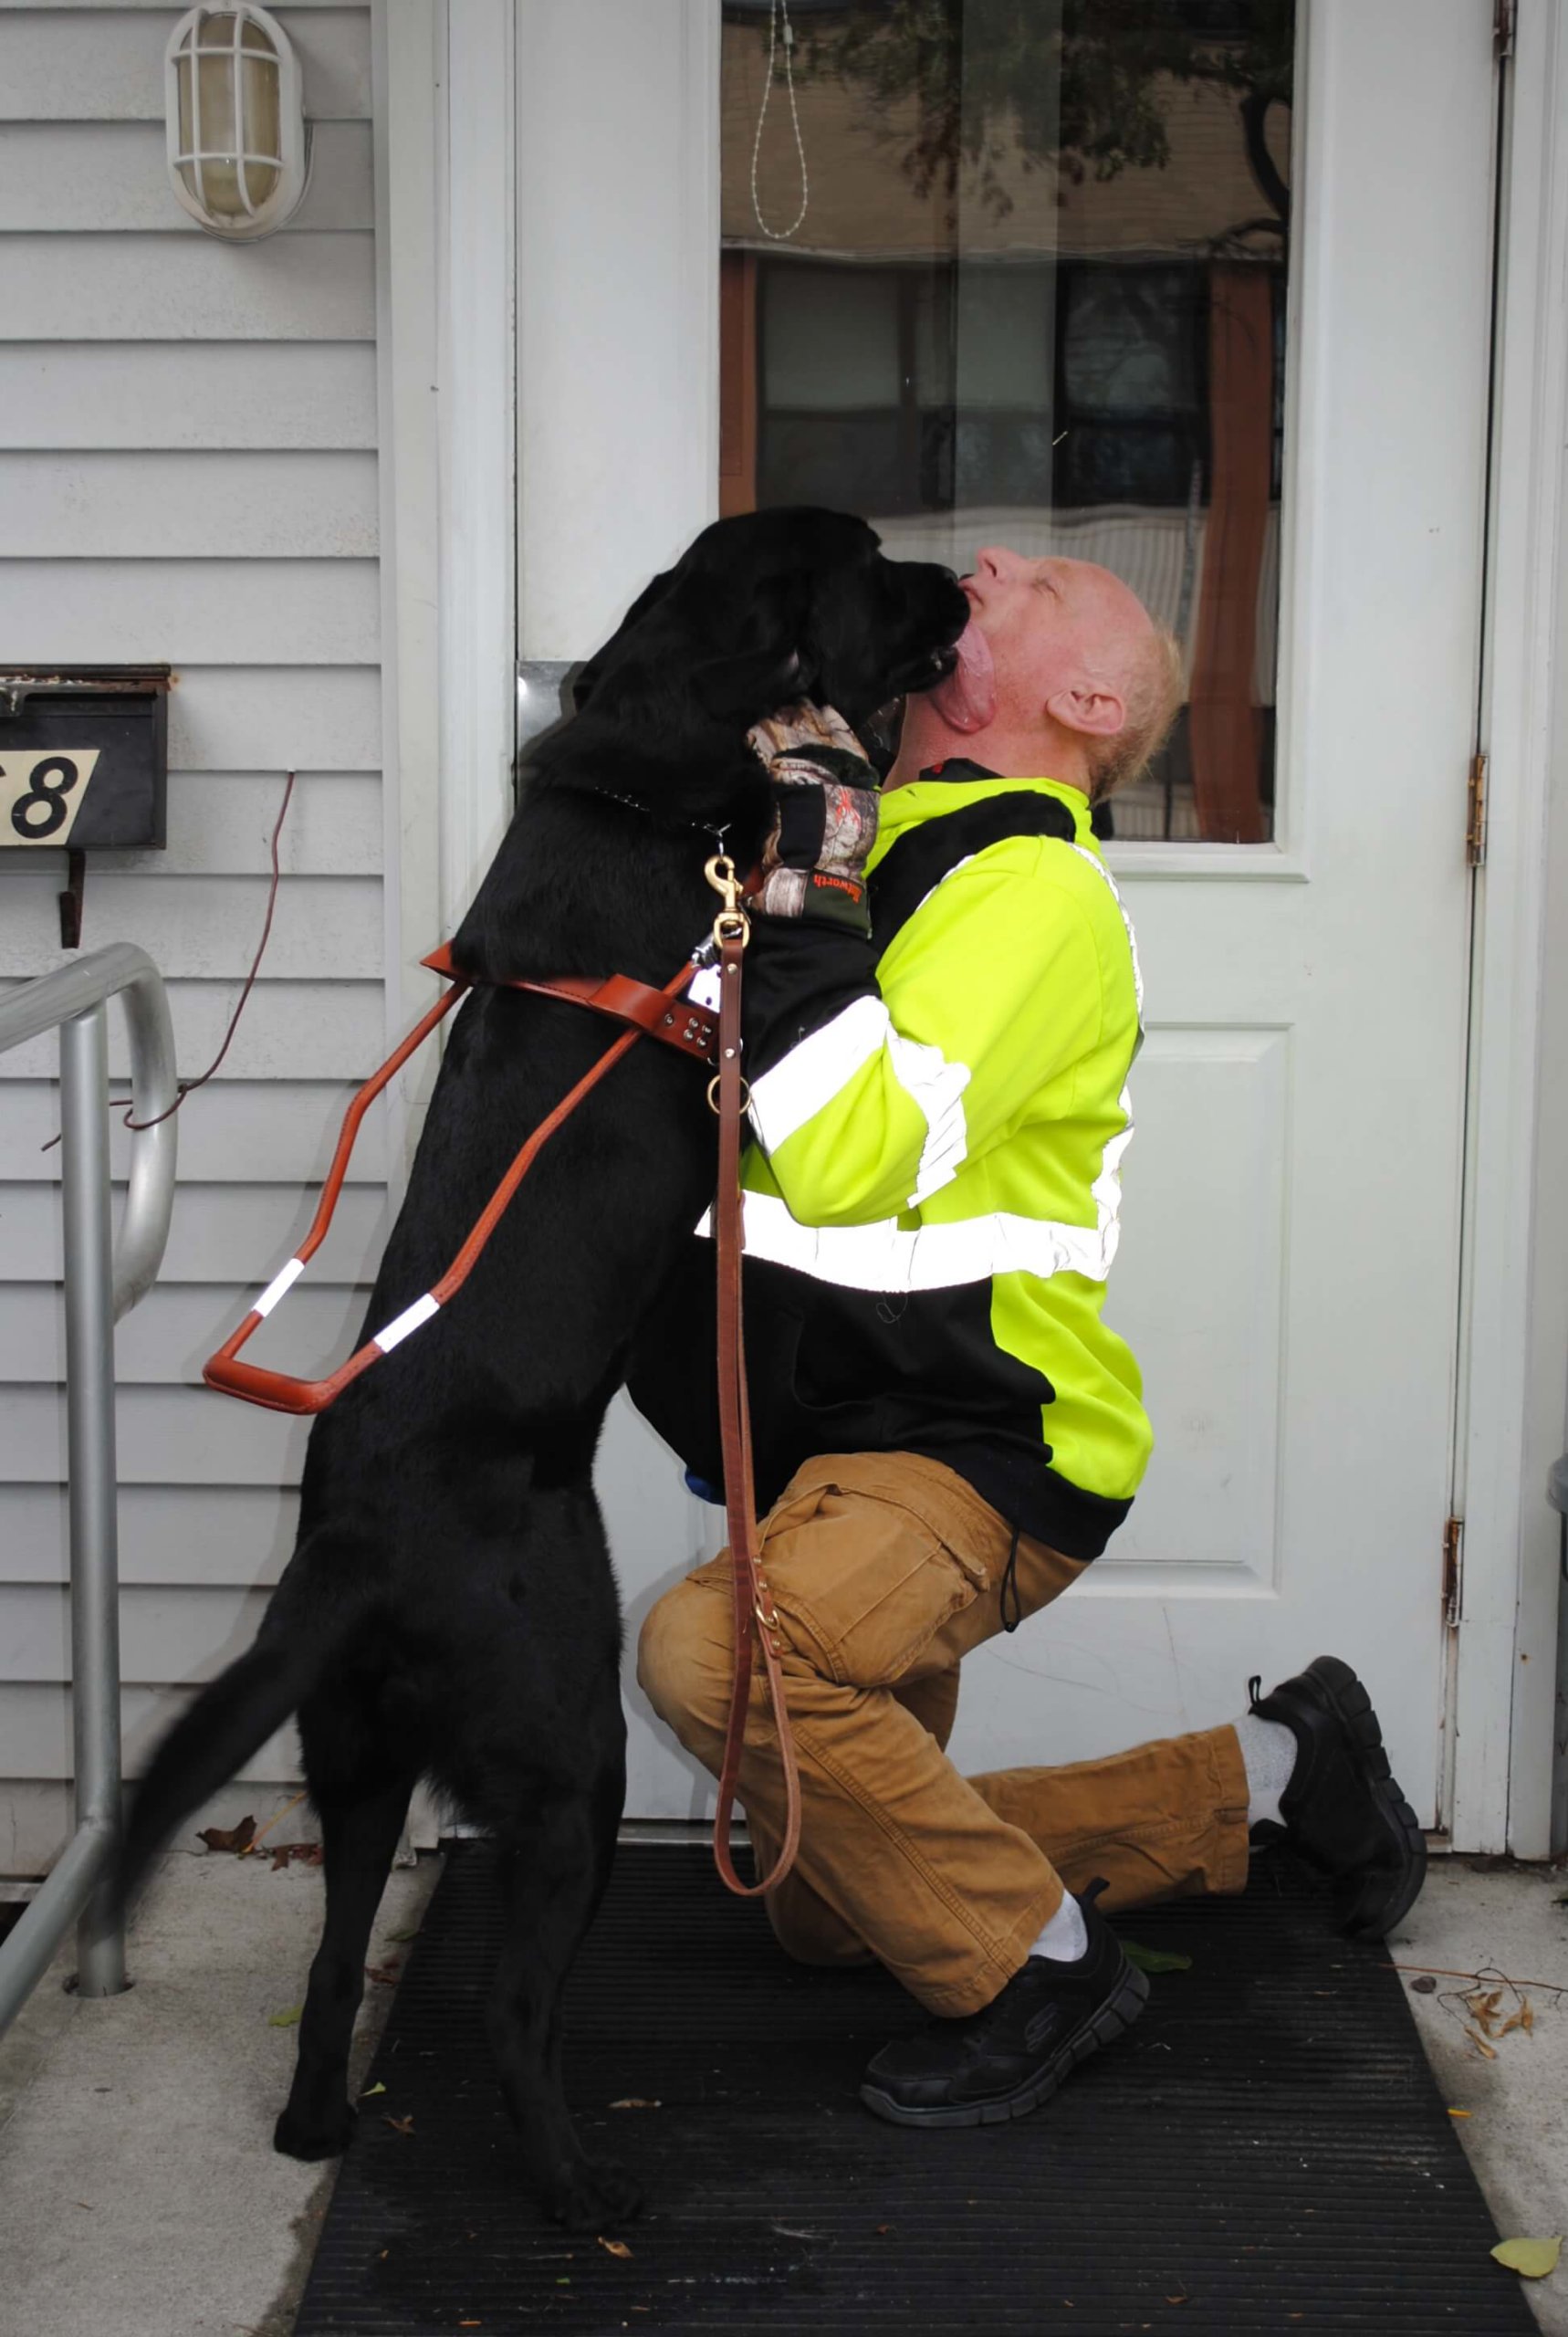 Argo gives Tommy a big kiss before heading out together